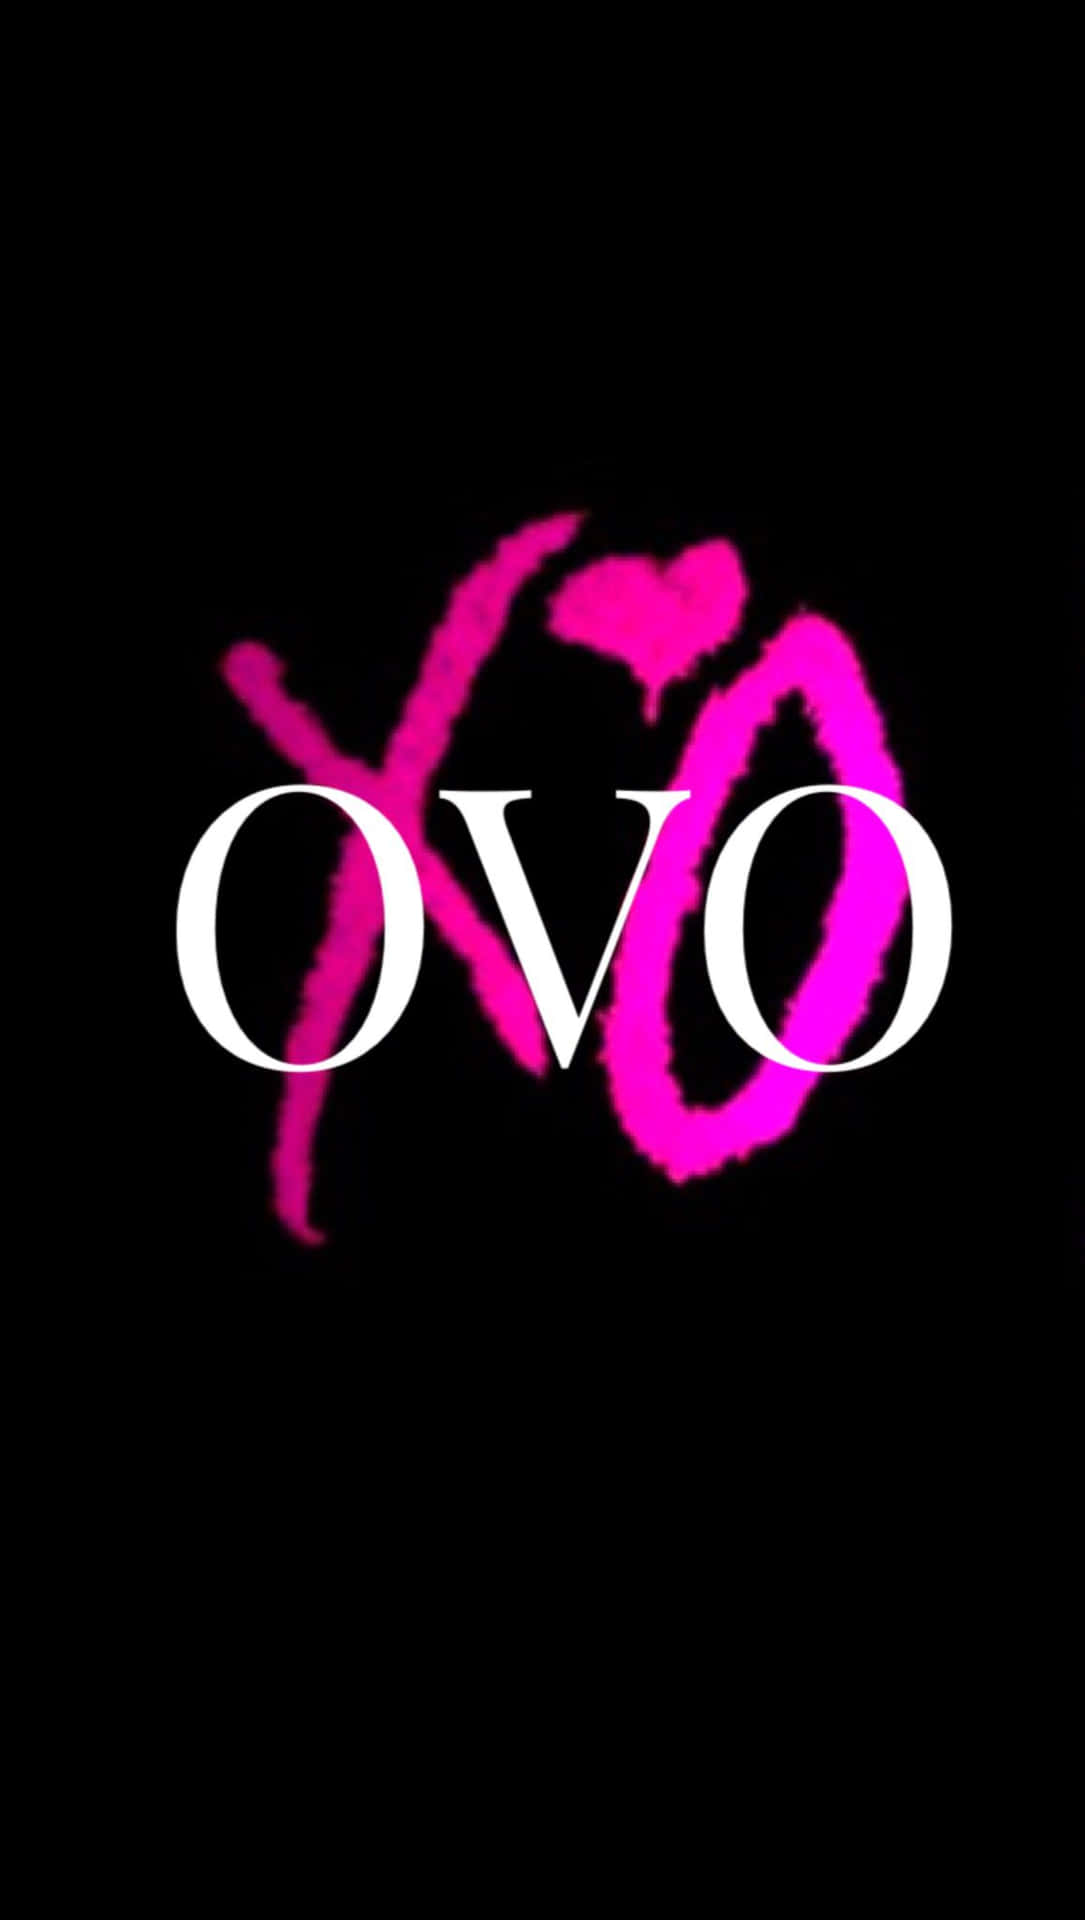 Ovoxo White And Pink Wallpaper